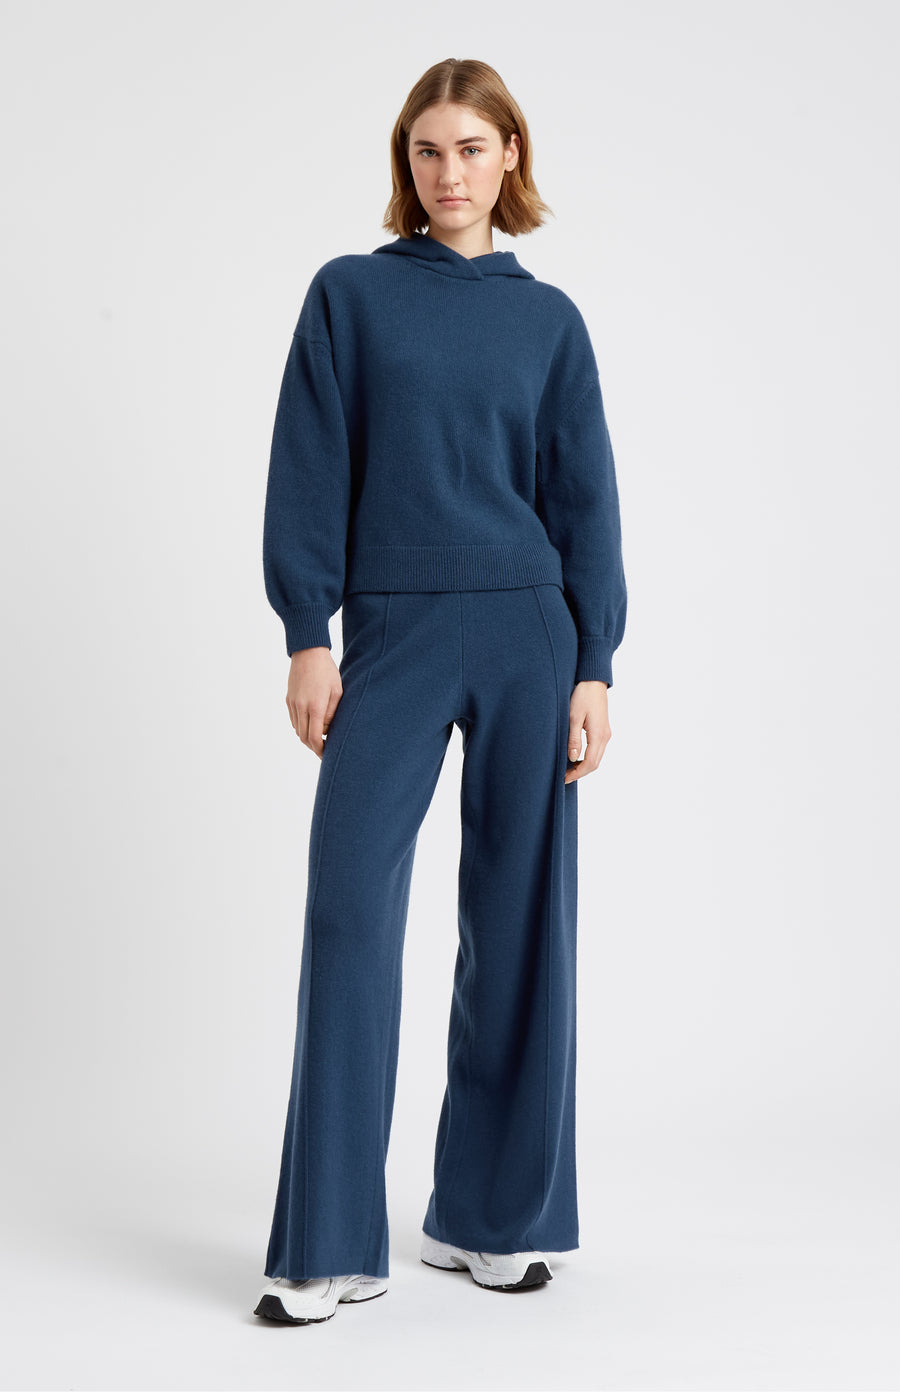 Pringle of Scotland Women's Cashmere Blend Hoodie In Night Sky with matching wide leg trouser